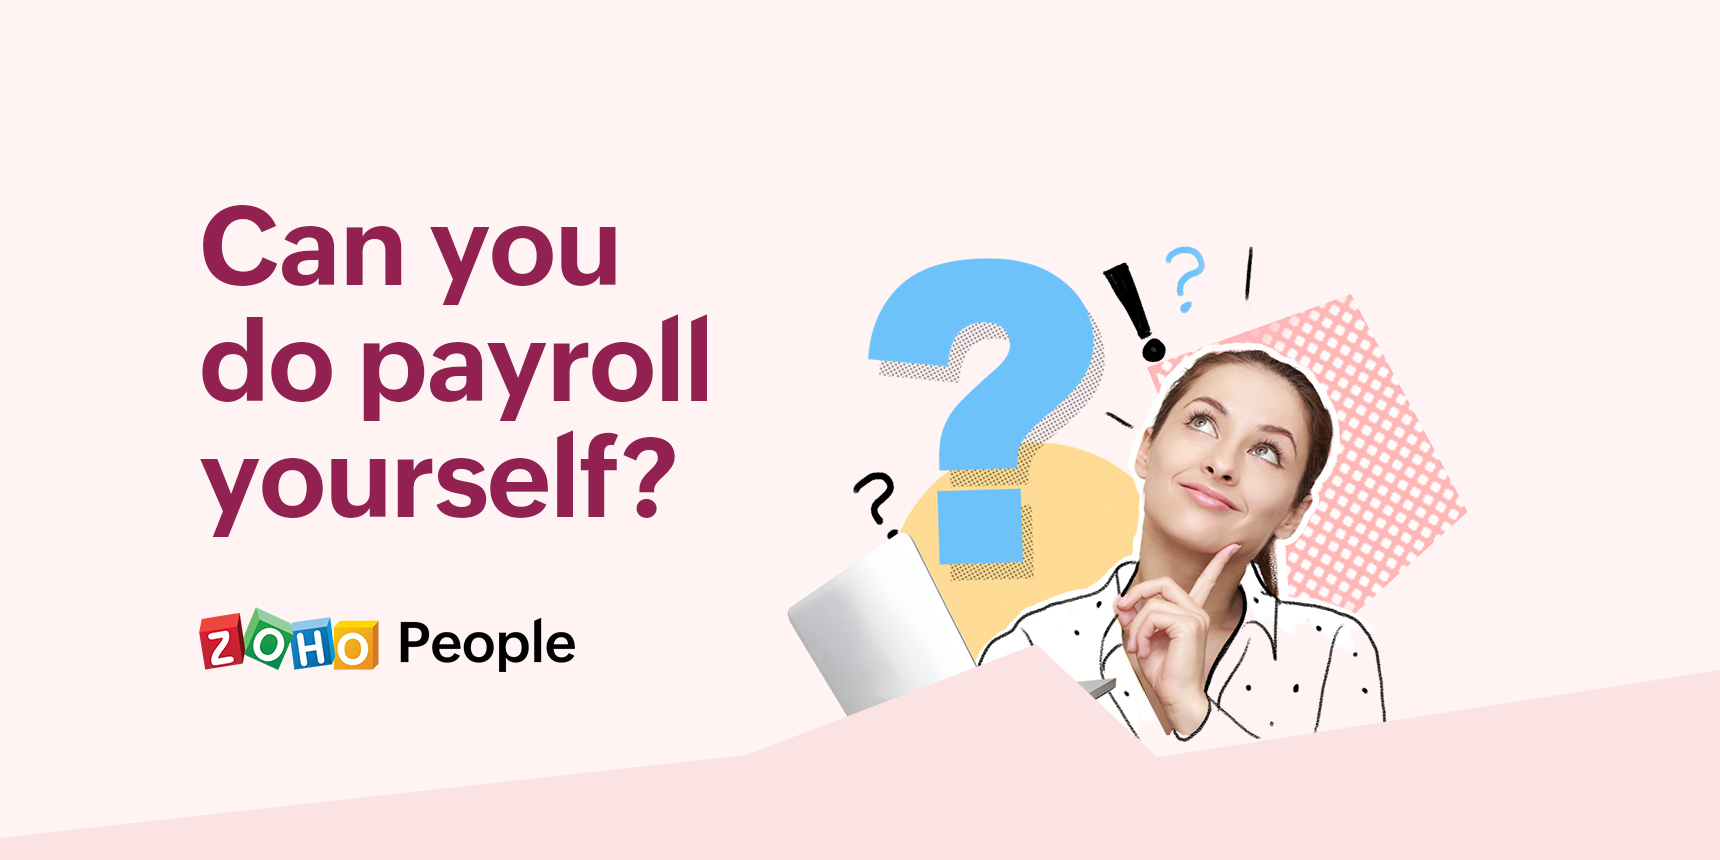 Can you do payroll yourself?